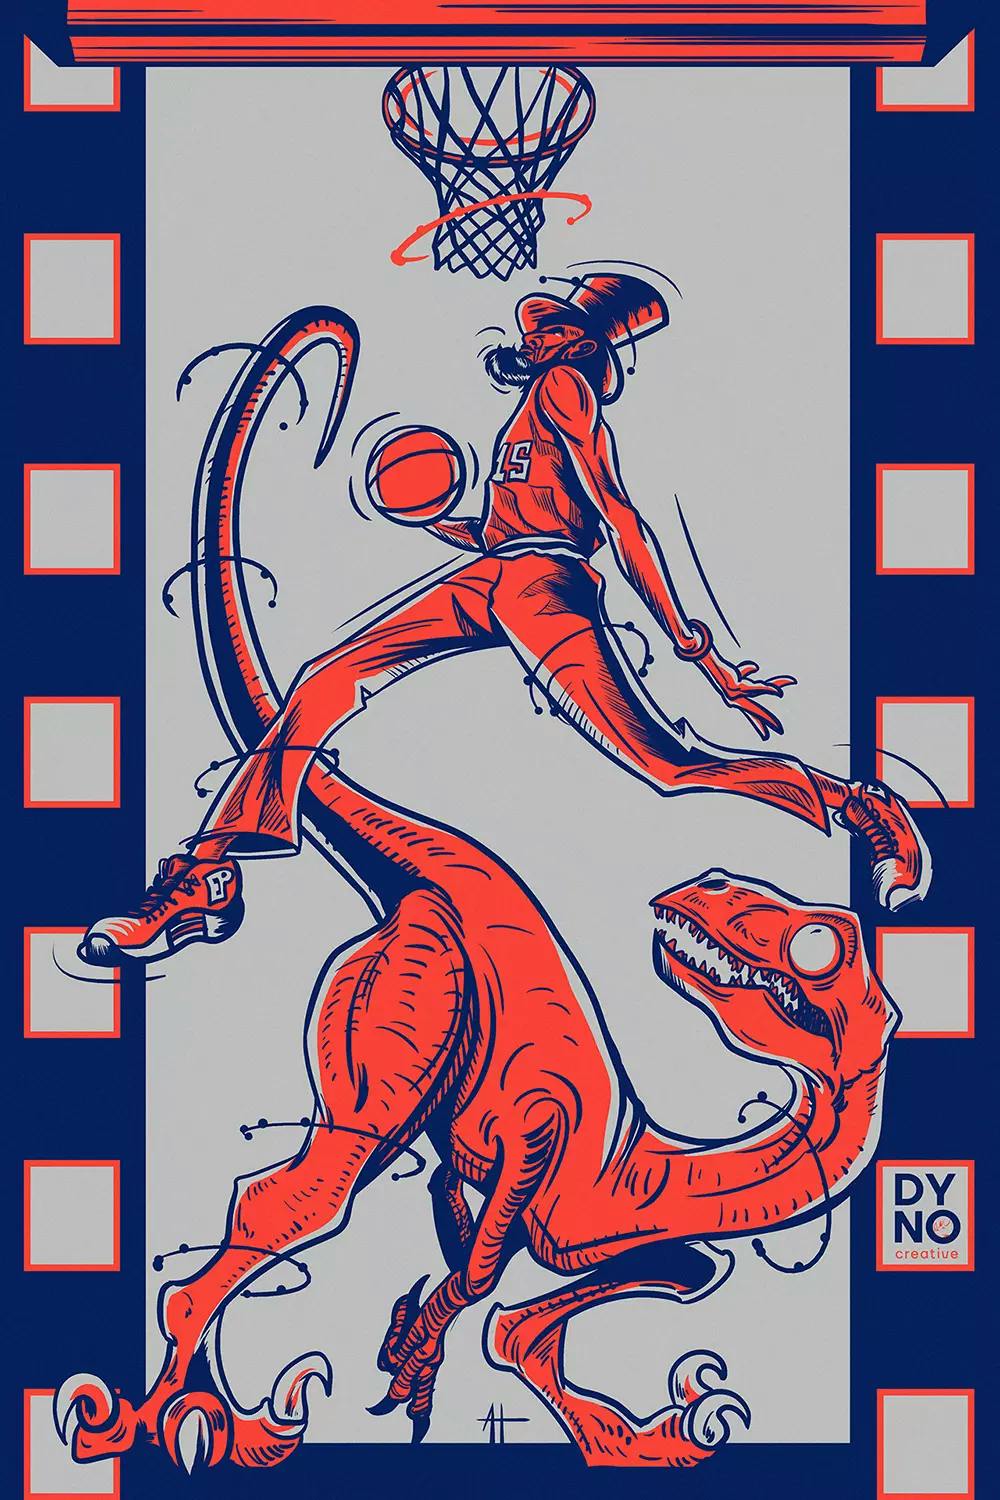 An illustration of a basketball player jumping over a dinosaur